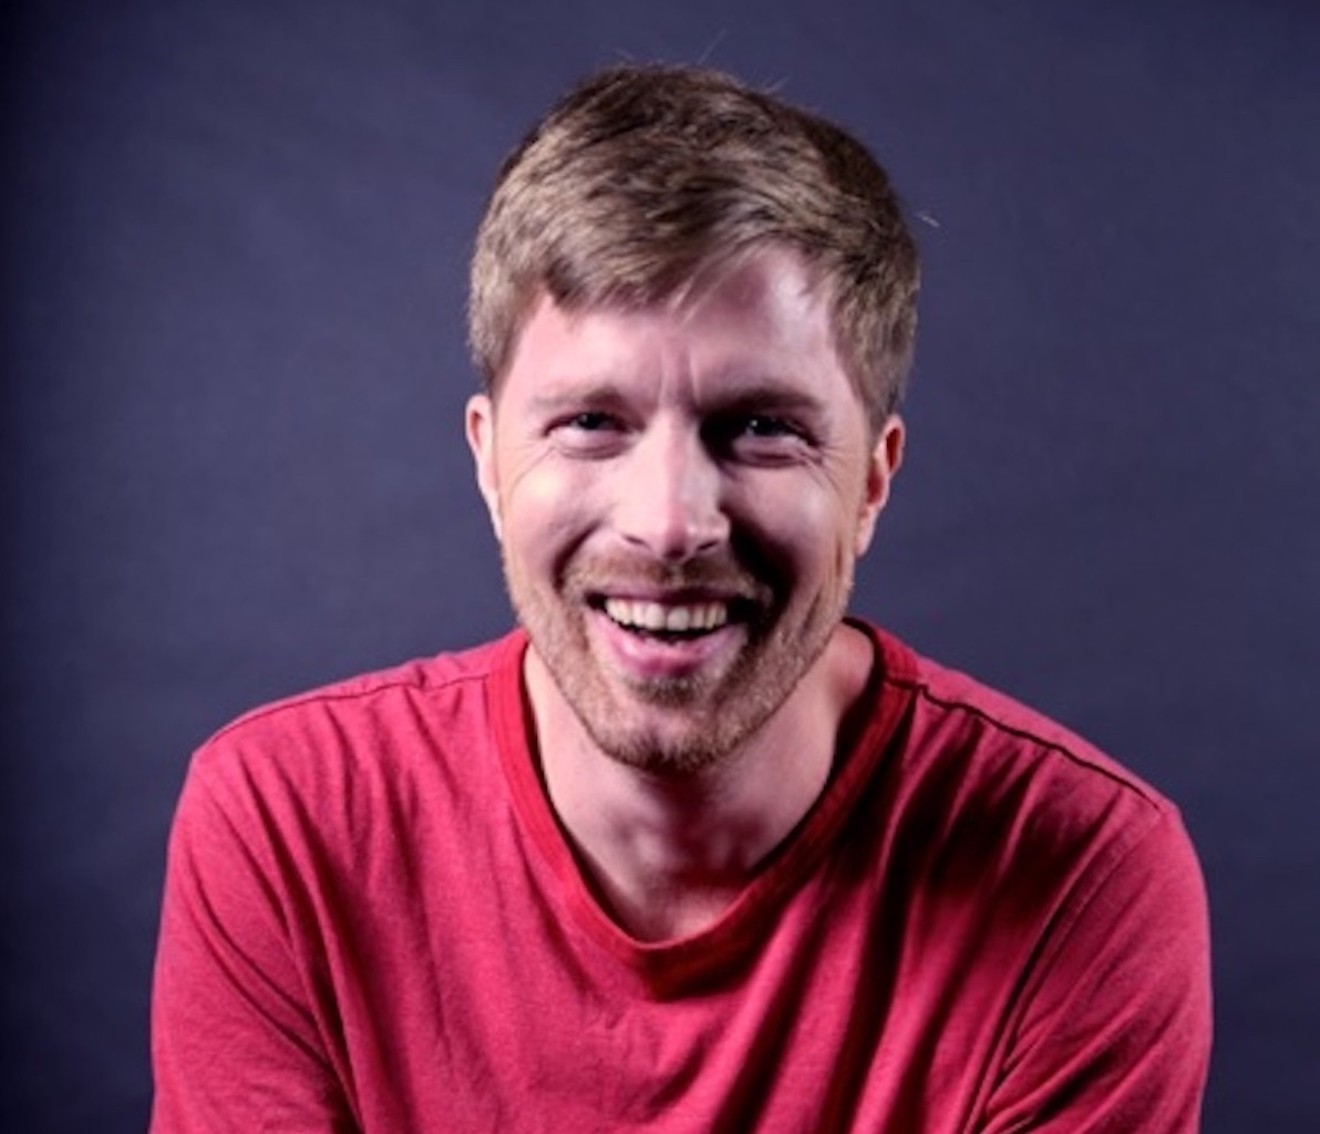 In addition to hosting Stand Up Science, Shane Mauss is the host of the science-themed podcast, Here We Are.